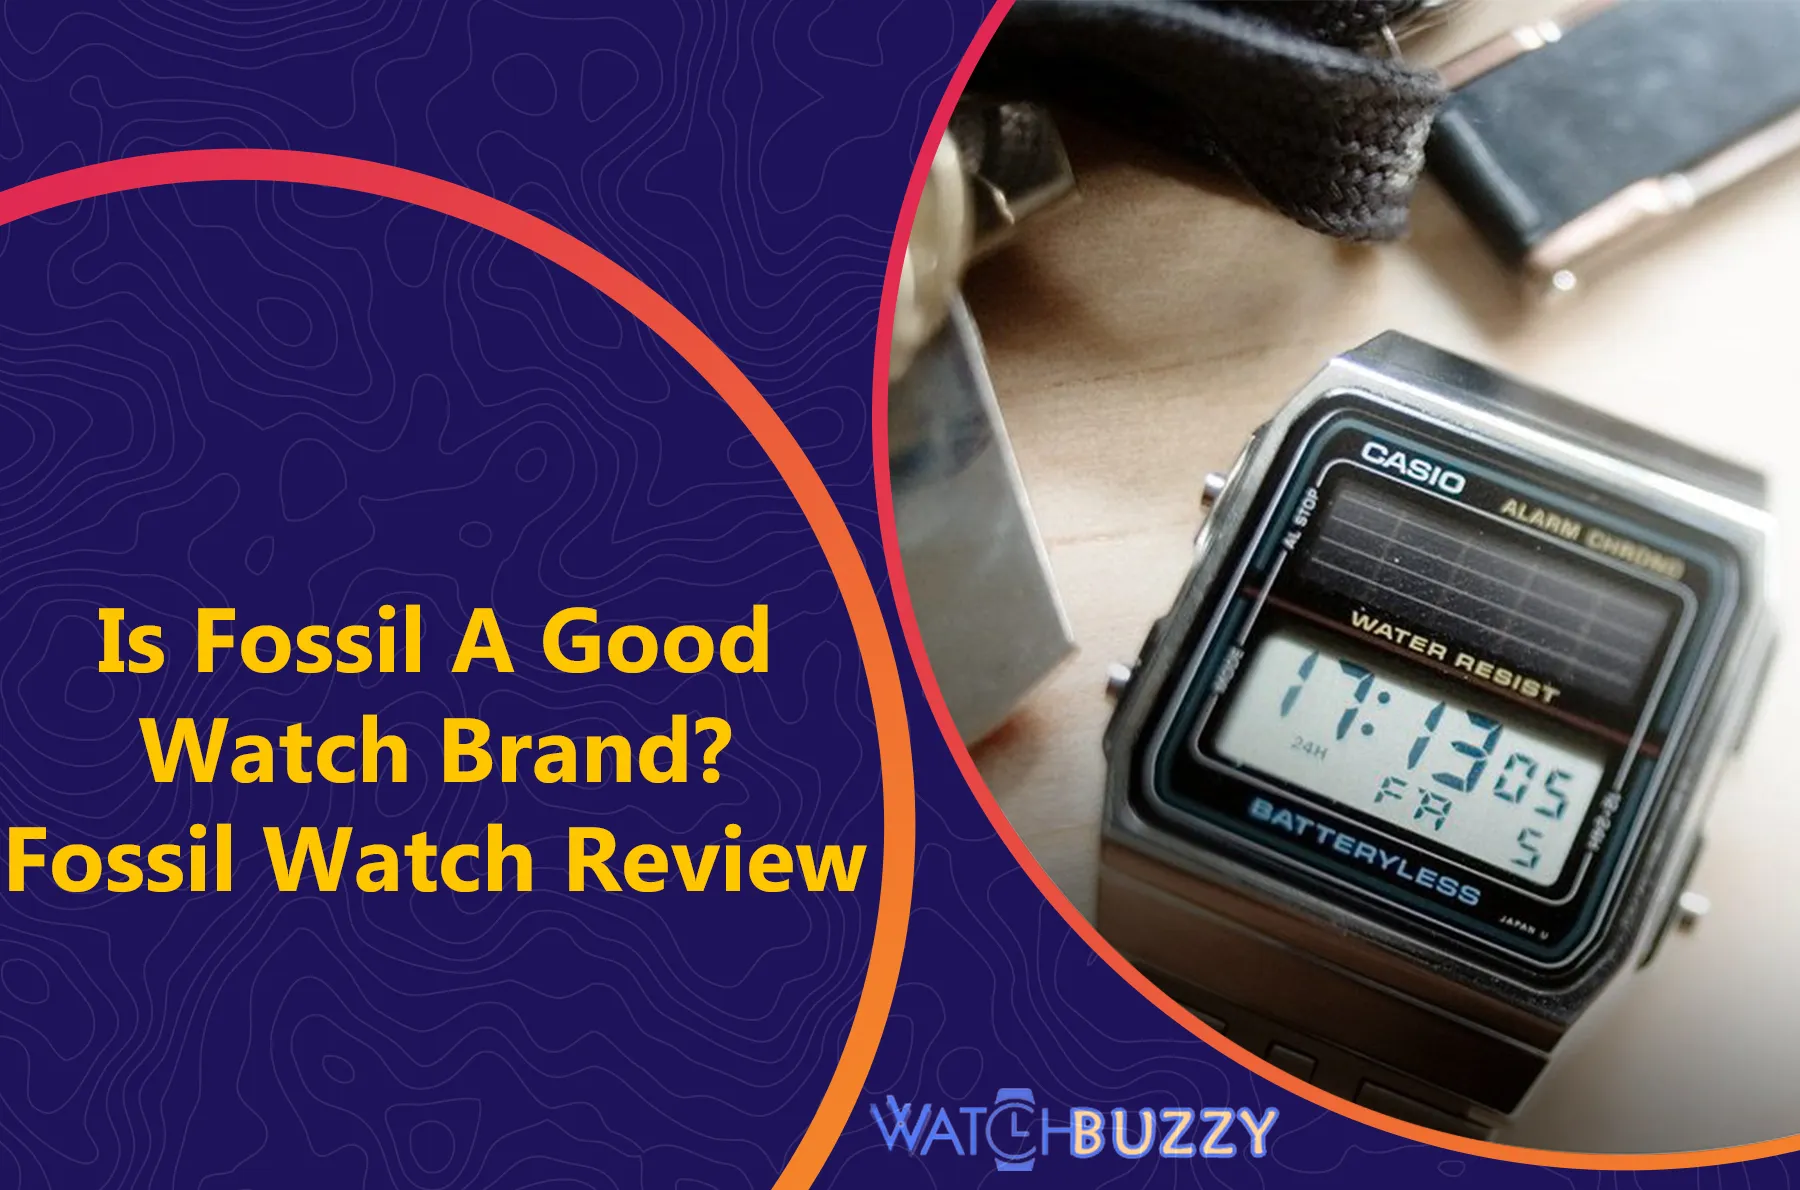 Is Fossil A Good Watch Brand? Fossil Watch Review